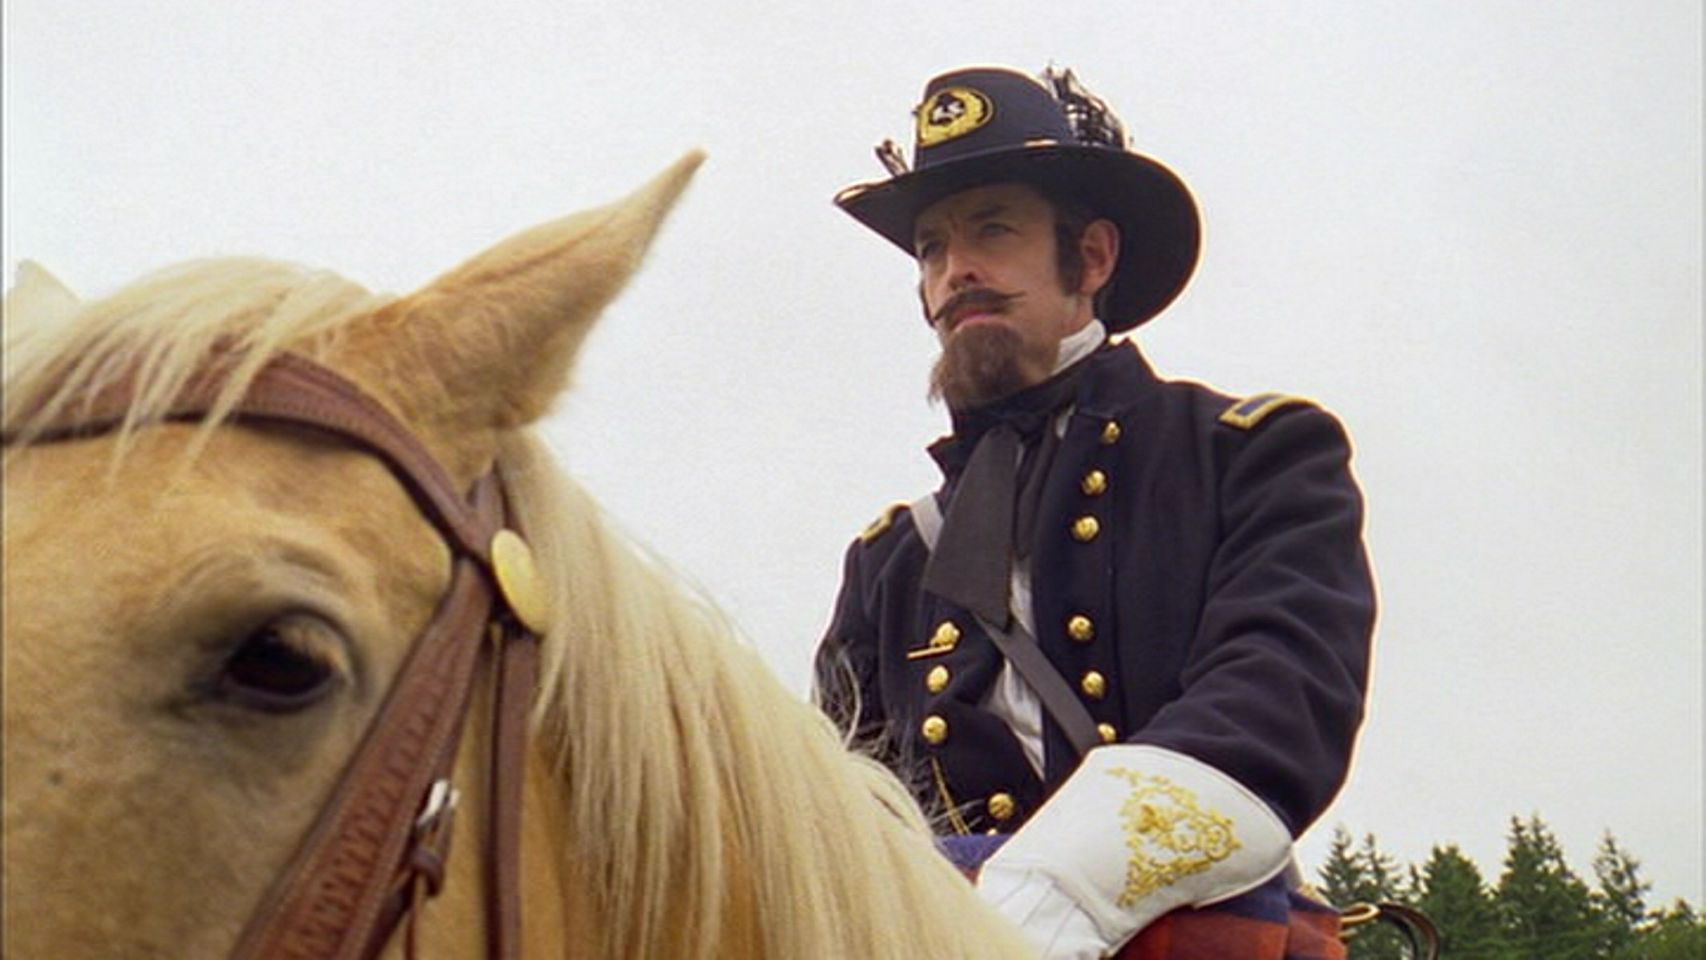 Detective Carlton Lassiter in his Civil War reenactment attire, complete with beard and mustache, sitting on a horse.